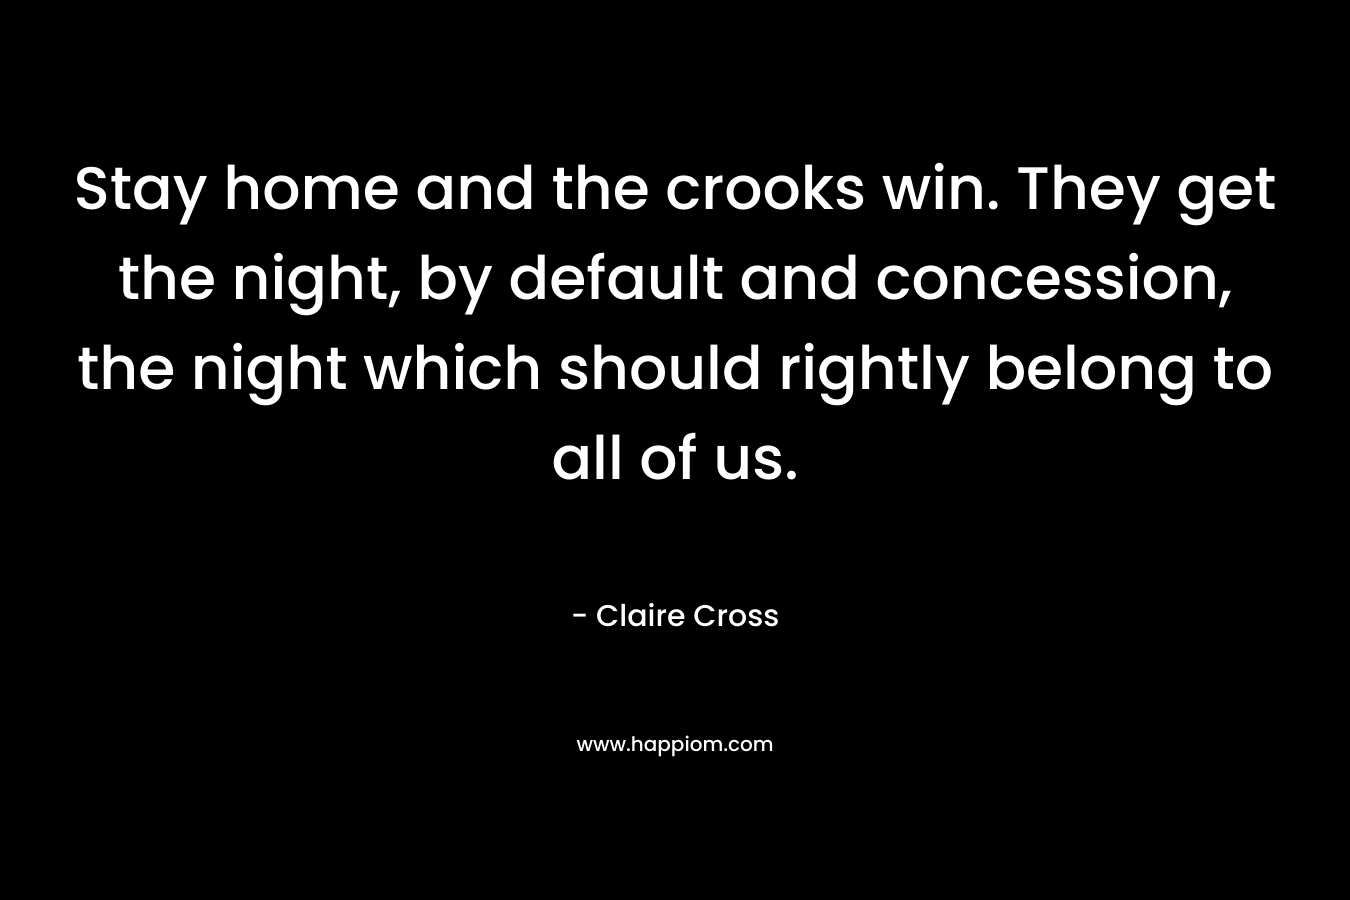 Stay home and the crooks win. They get the night, by default and concession, the night which should rightly belong to all of us. – Claire Cross